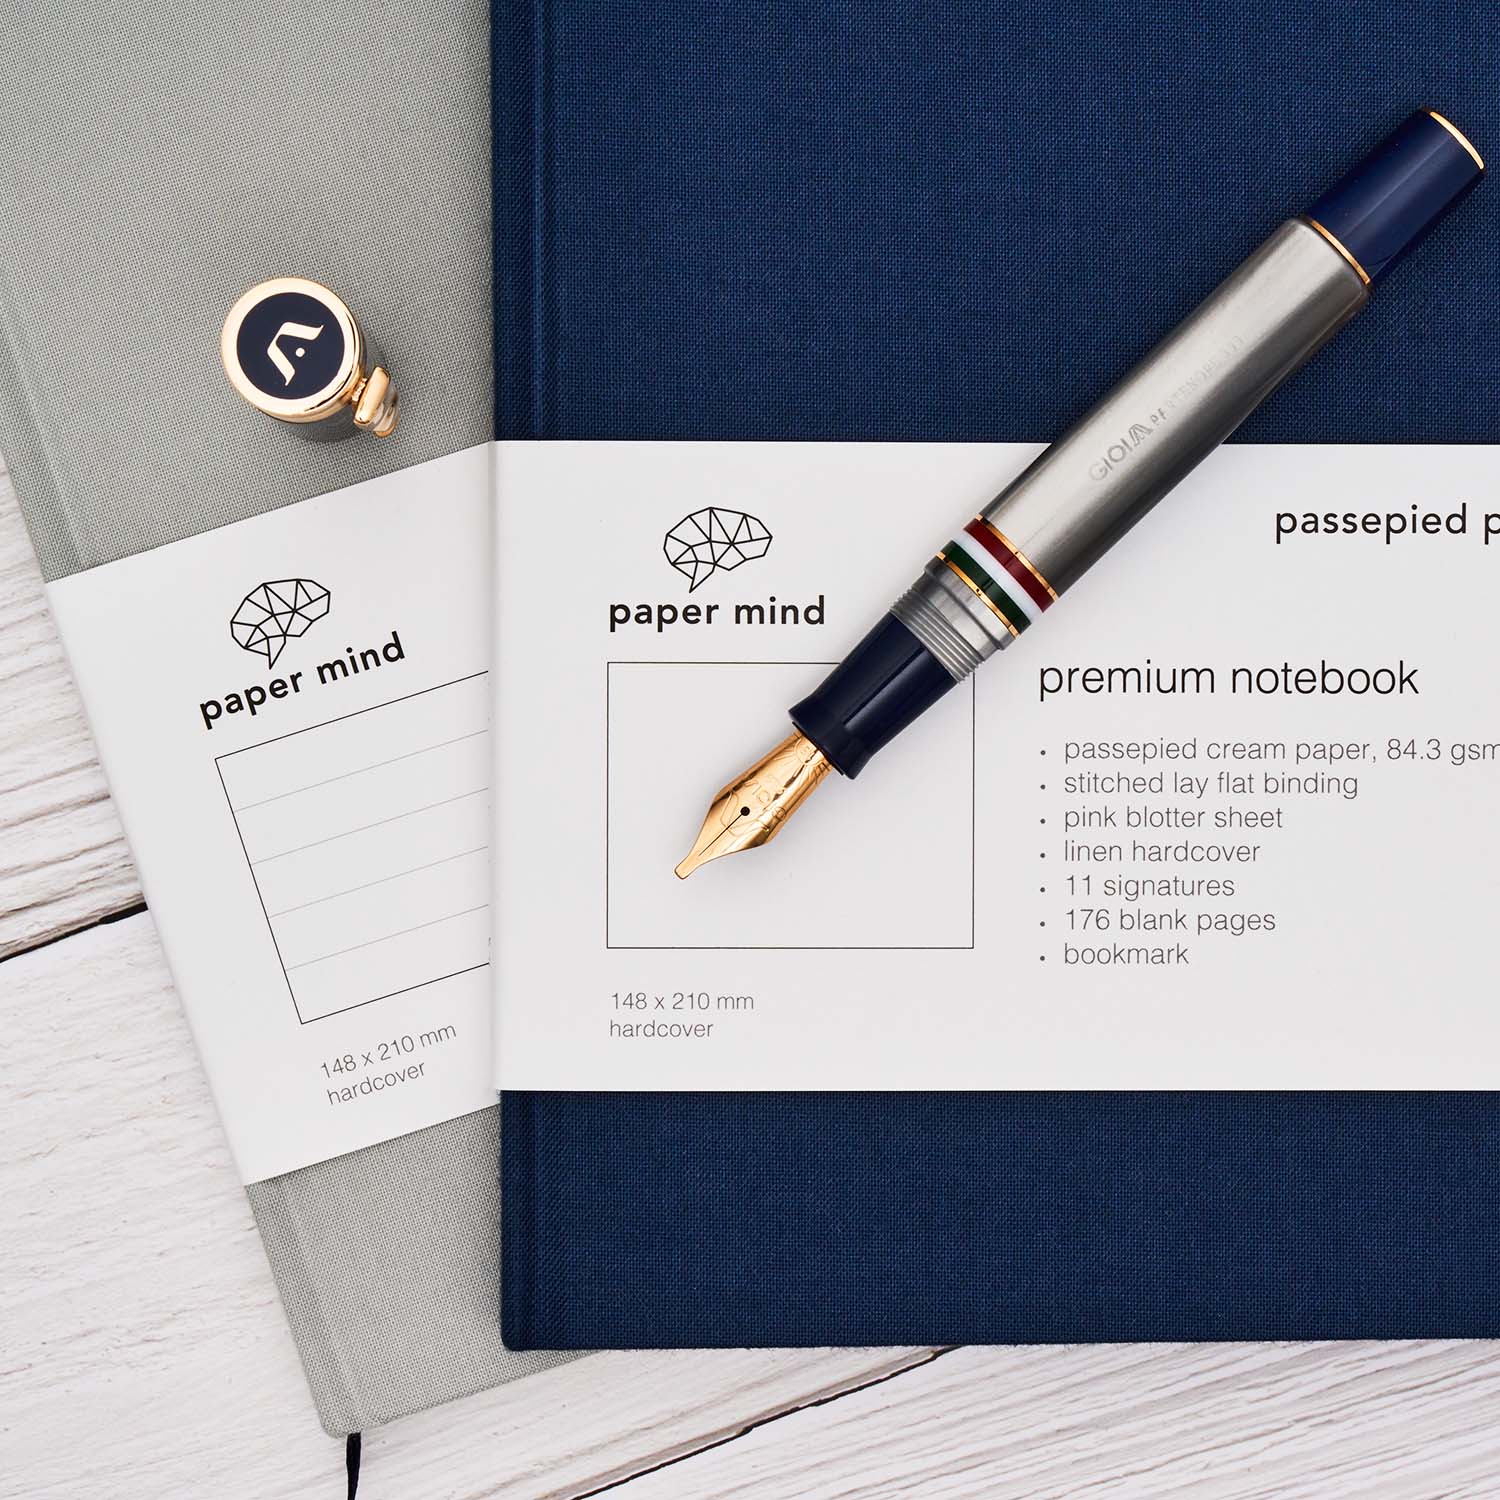 Gioia Partenope Fountain Pen + Rollerball - Madreperla - Gold Trim Made in Italy with Paper Mind Notebooks